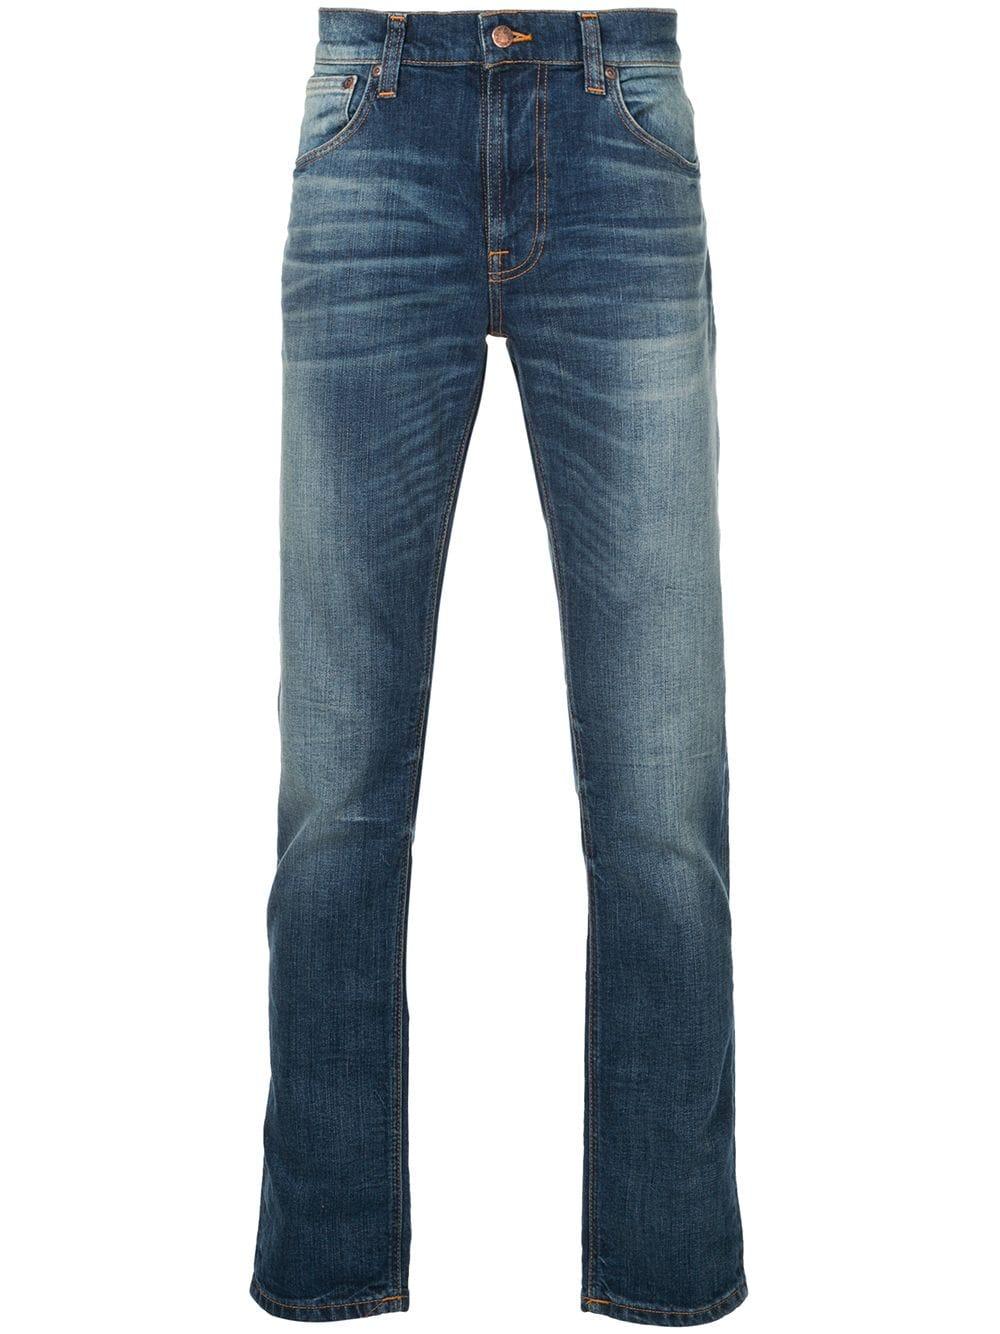 Nudie Jeans Stonewashed Slim Jeans in Blue for Men - Lyst